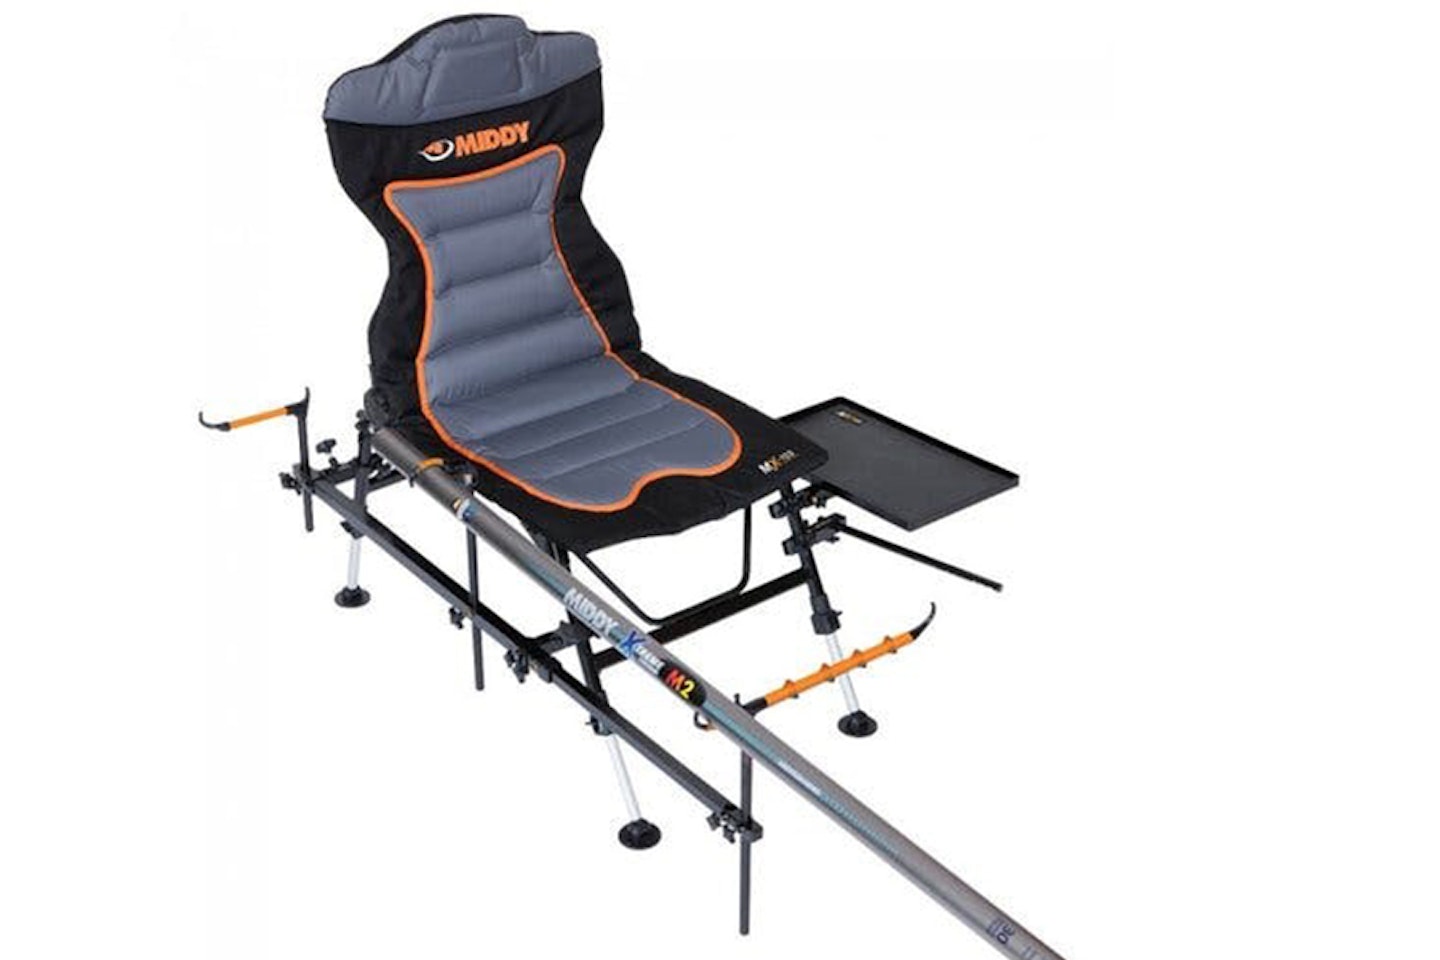 The best fishing chairs